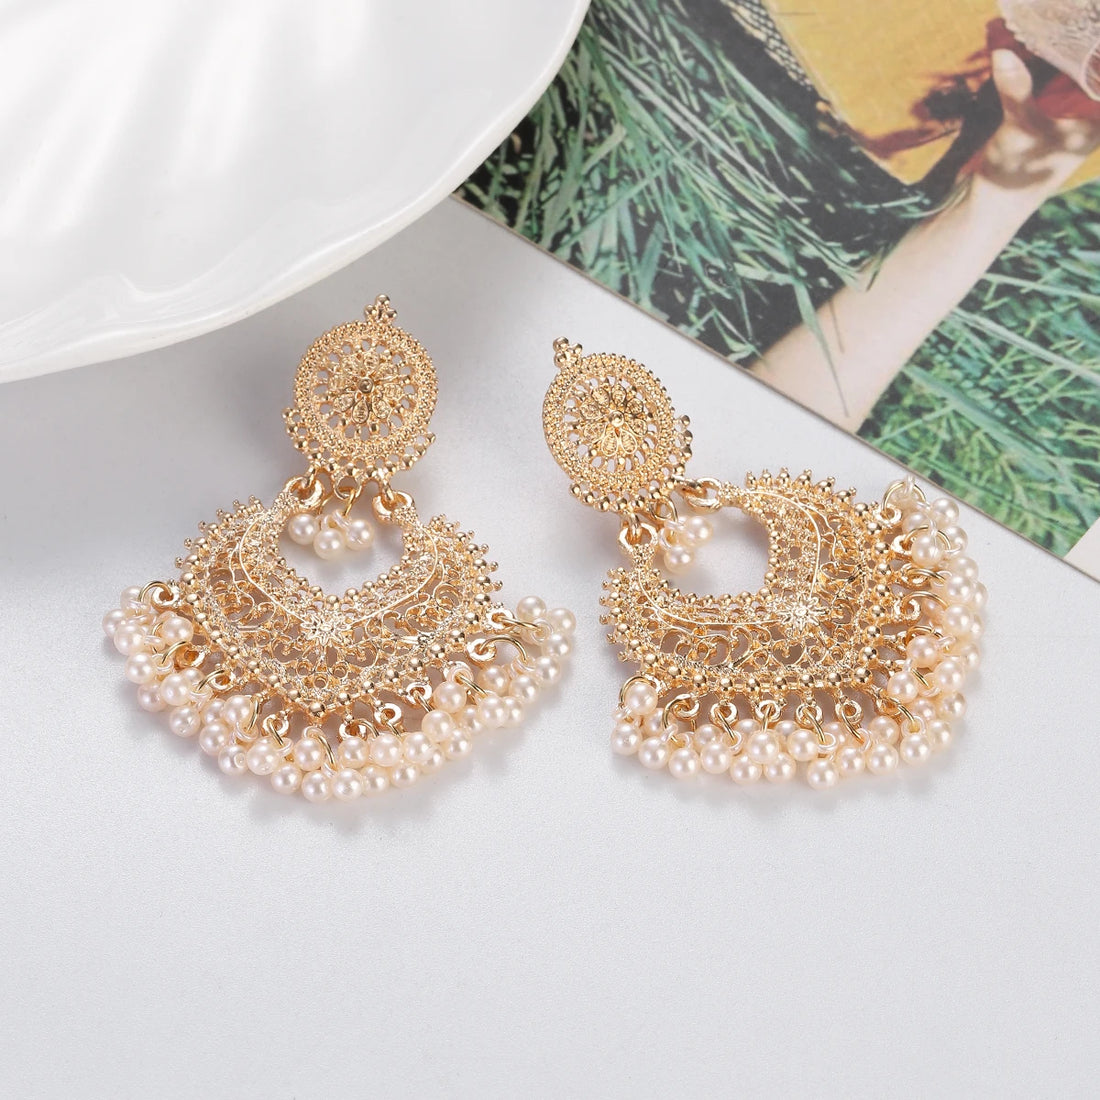 Ethnic Indian Earring Round